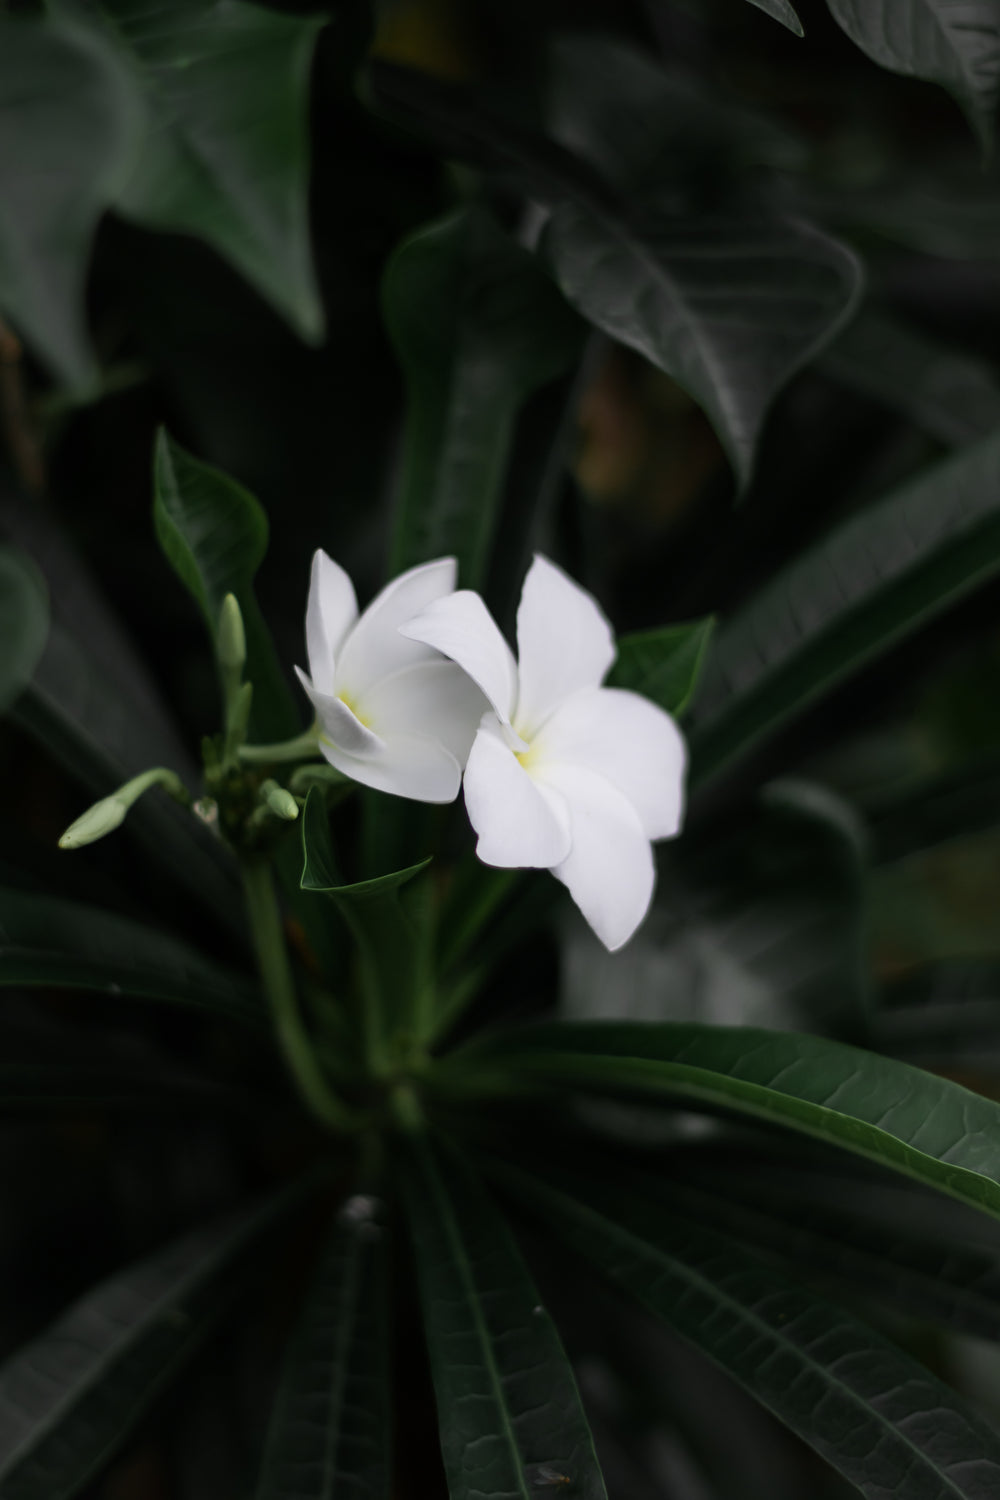 white blooming flowers from a dark green plant